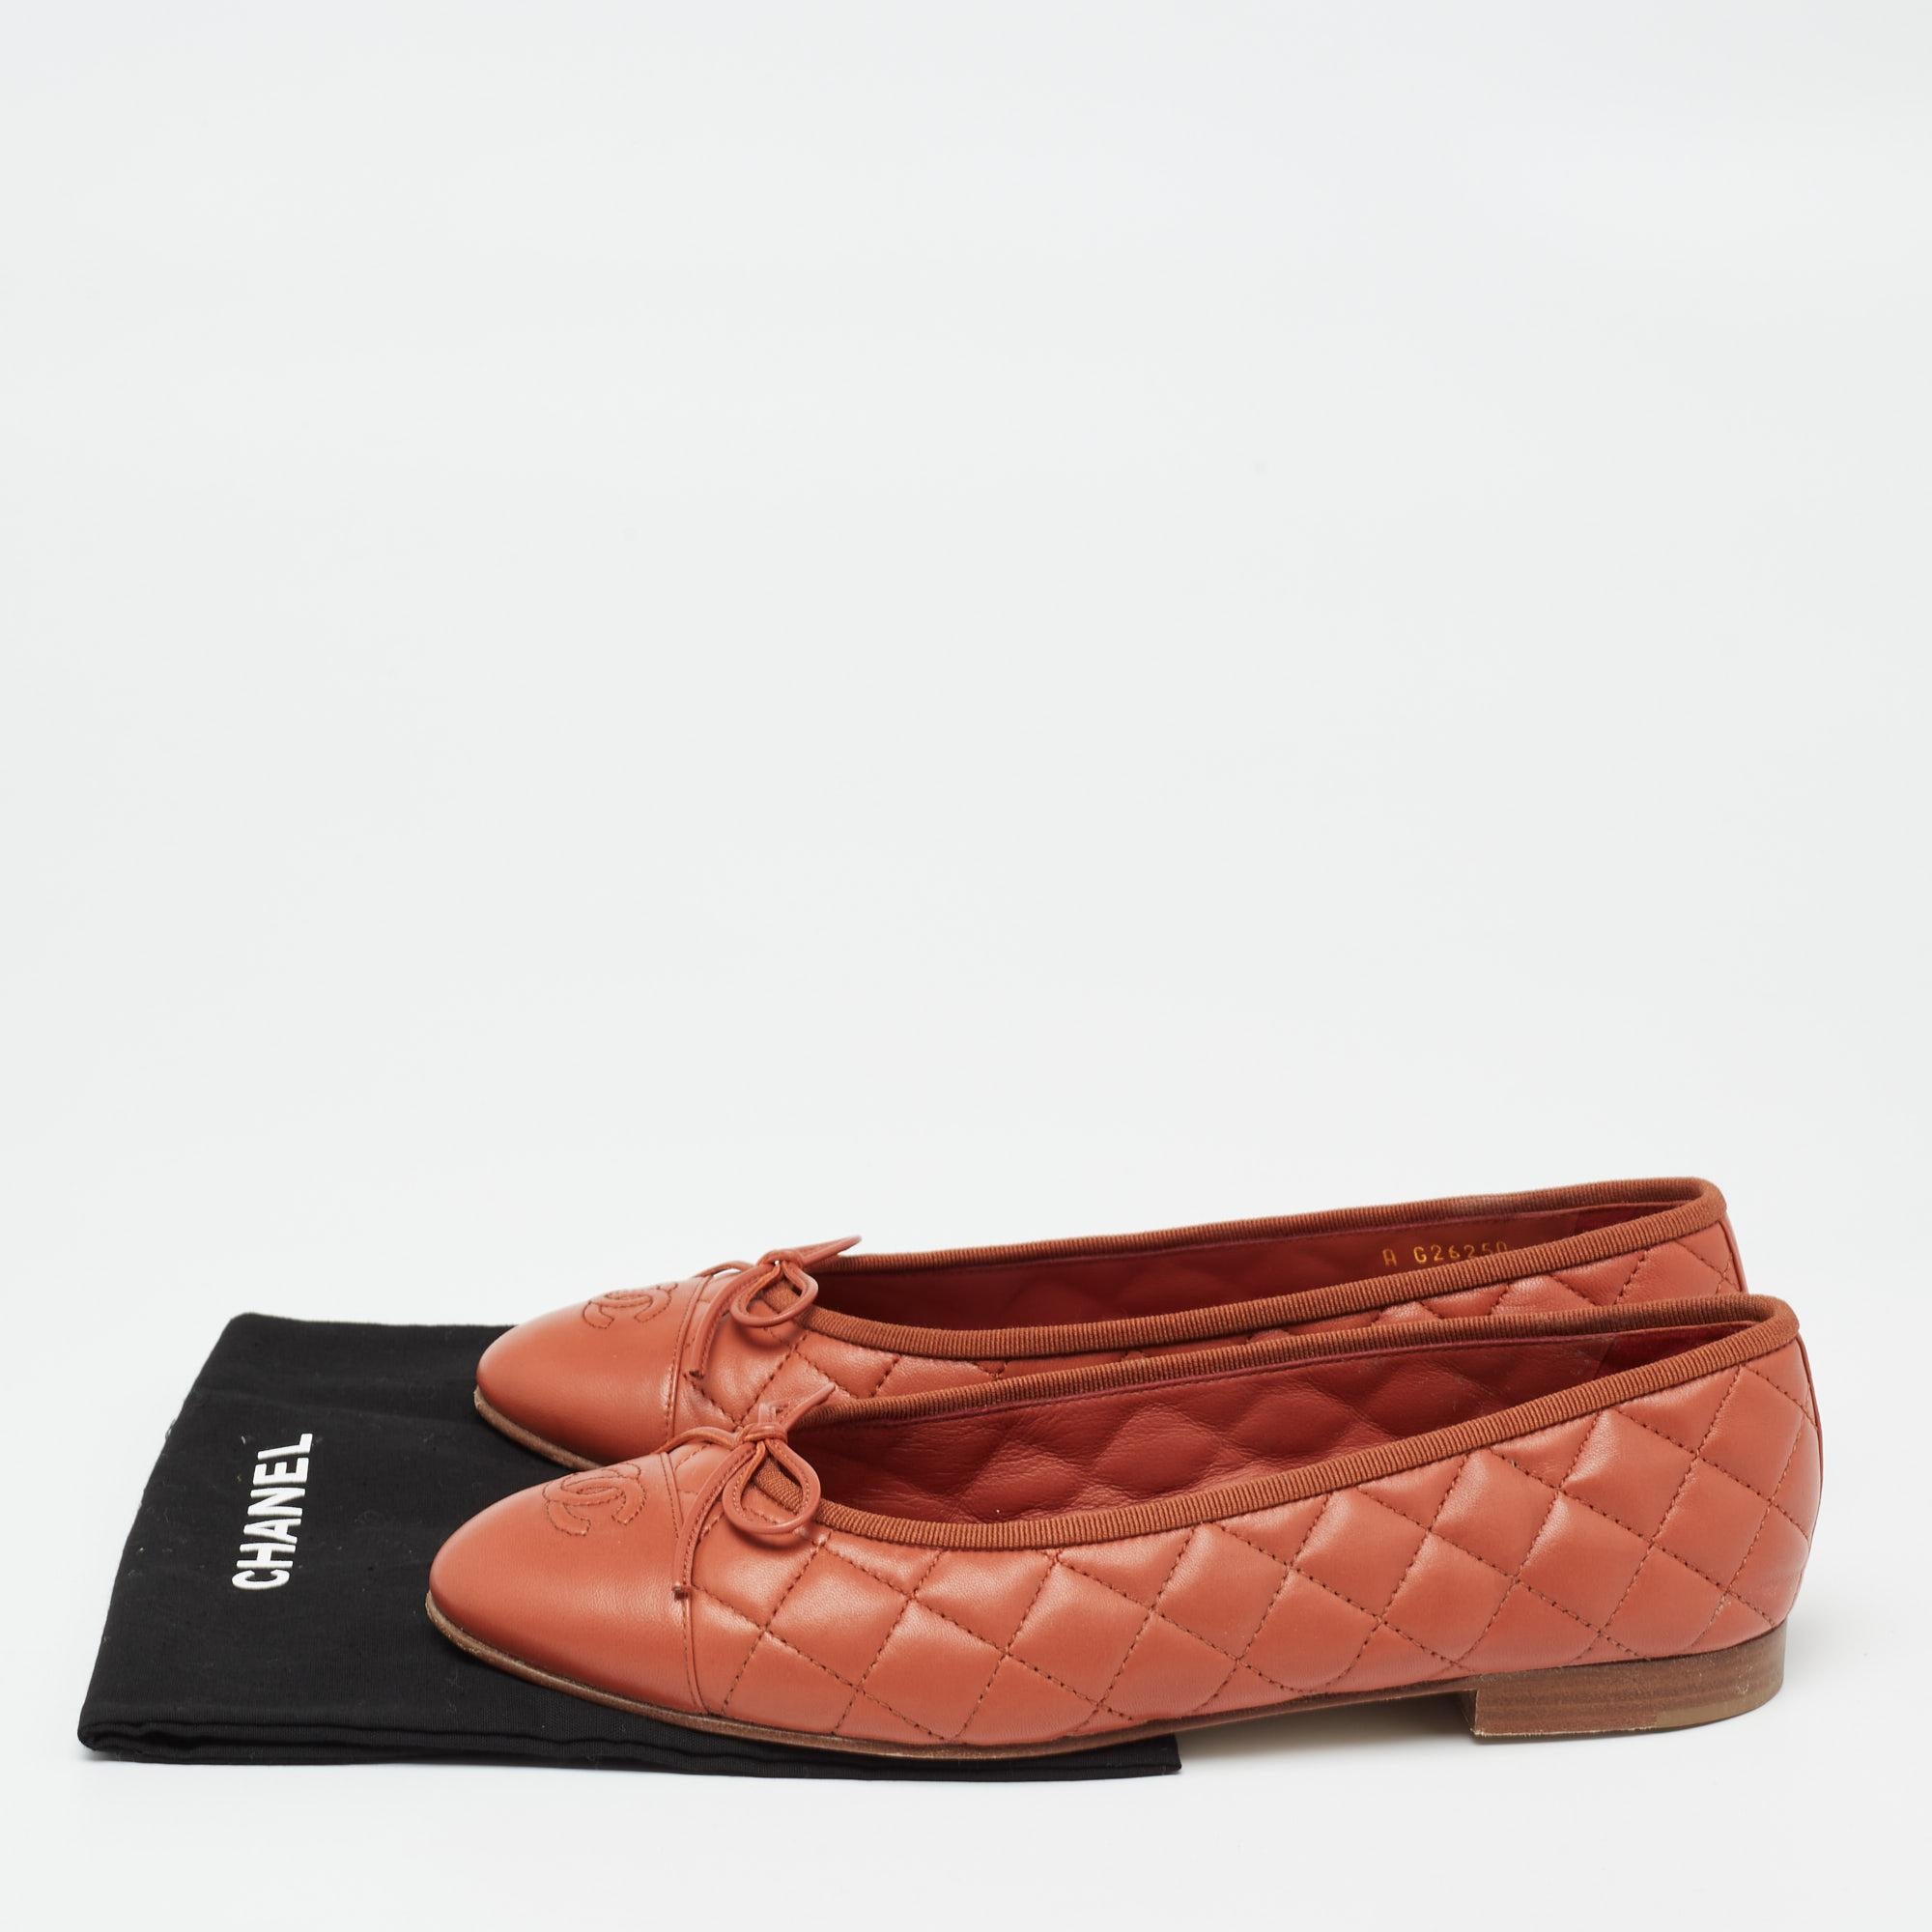 Chanel Orange Quilted Leather CC Cap Toe Ballet Flats Size 40.5 2